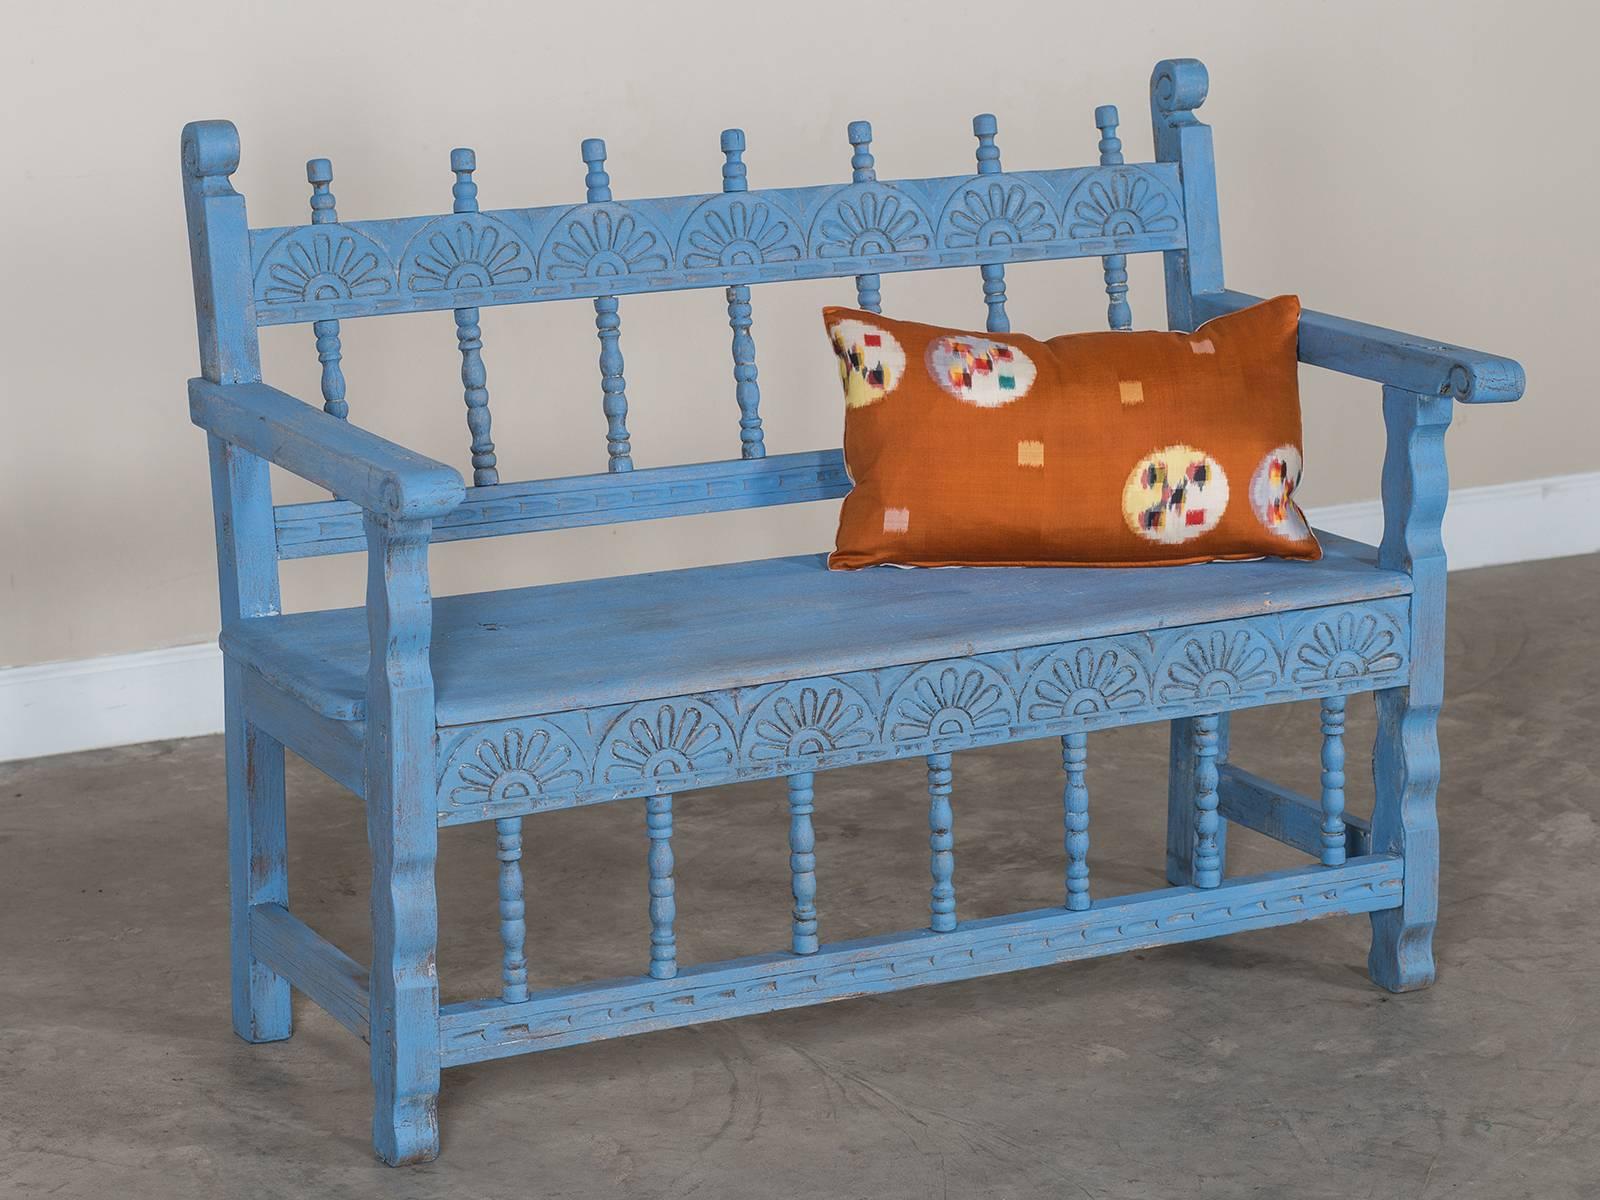 Receive our new selections direct from 1stdibs by email each week. Please click Follow Dealer below and see them first!

The cheerful color and design of this antique French bench circa 1890 makes it a desirable addition to any casual space. The